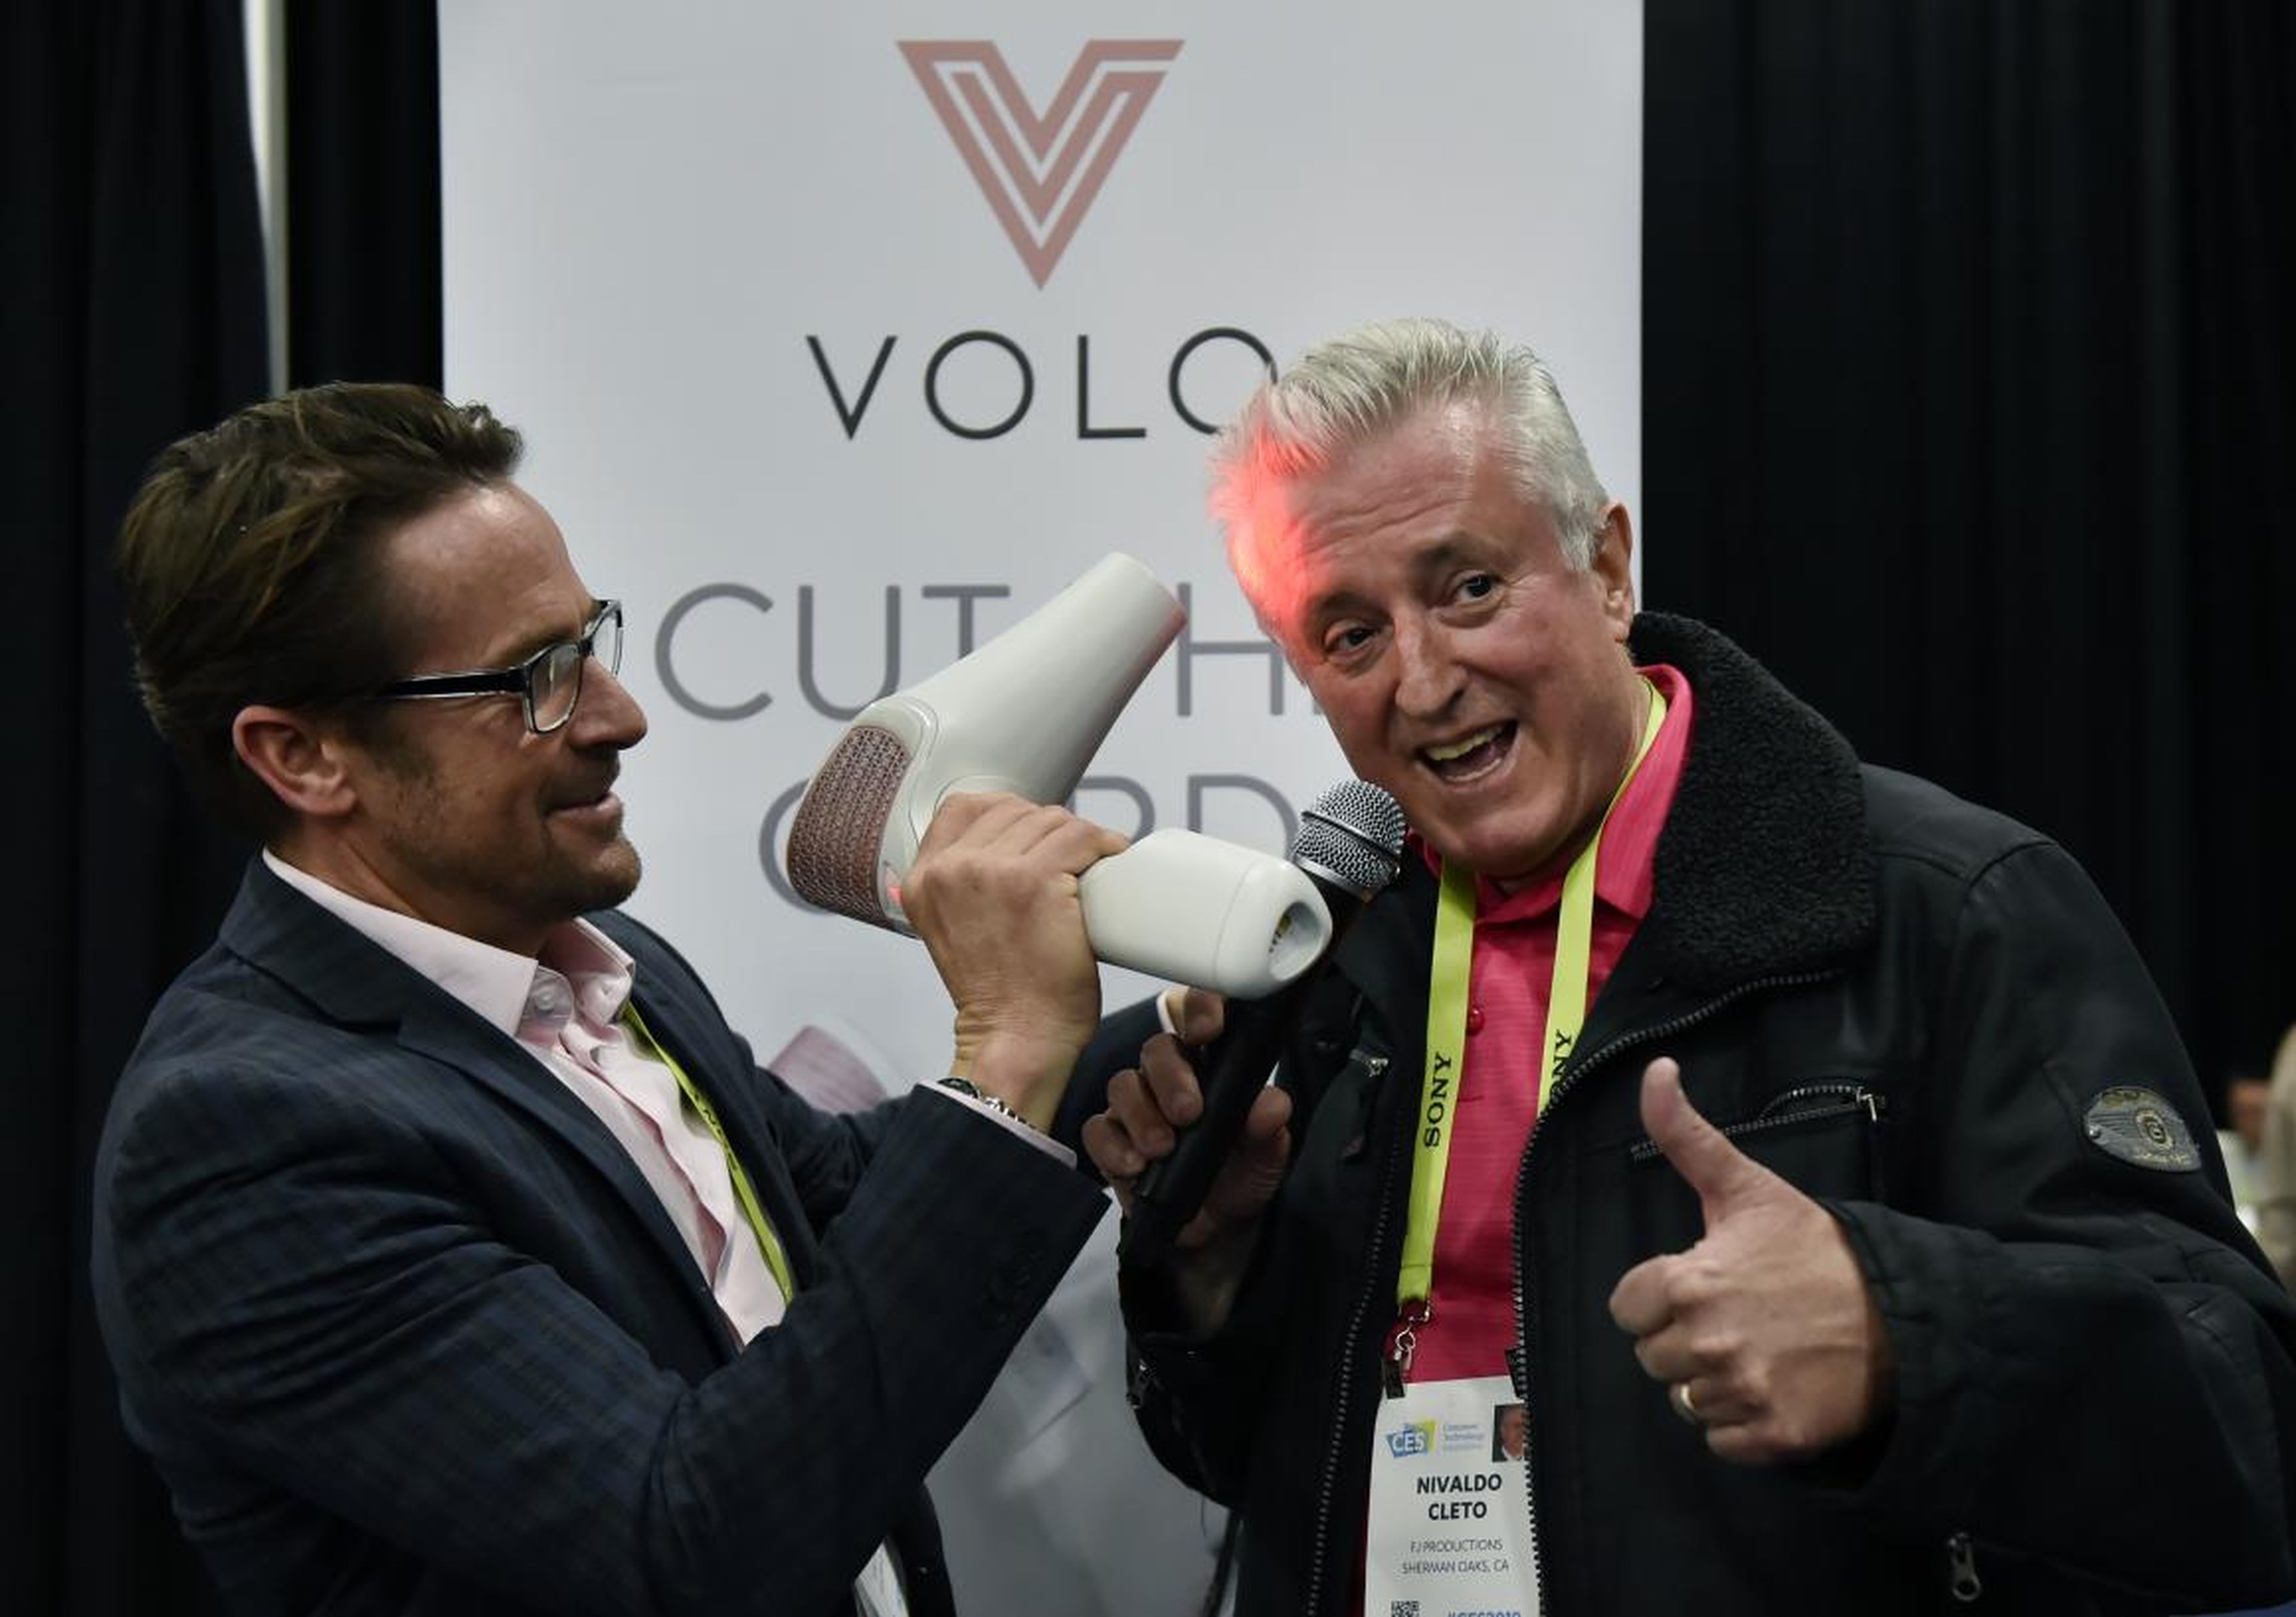 Volo's cordless hairdryer uses infrared radiant heat instead of hot air.